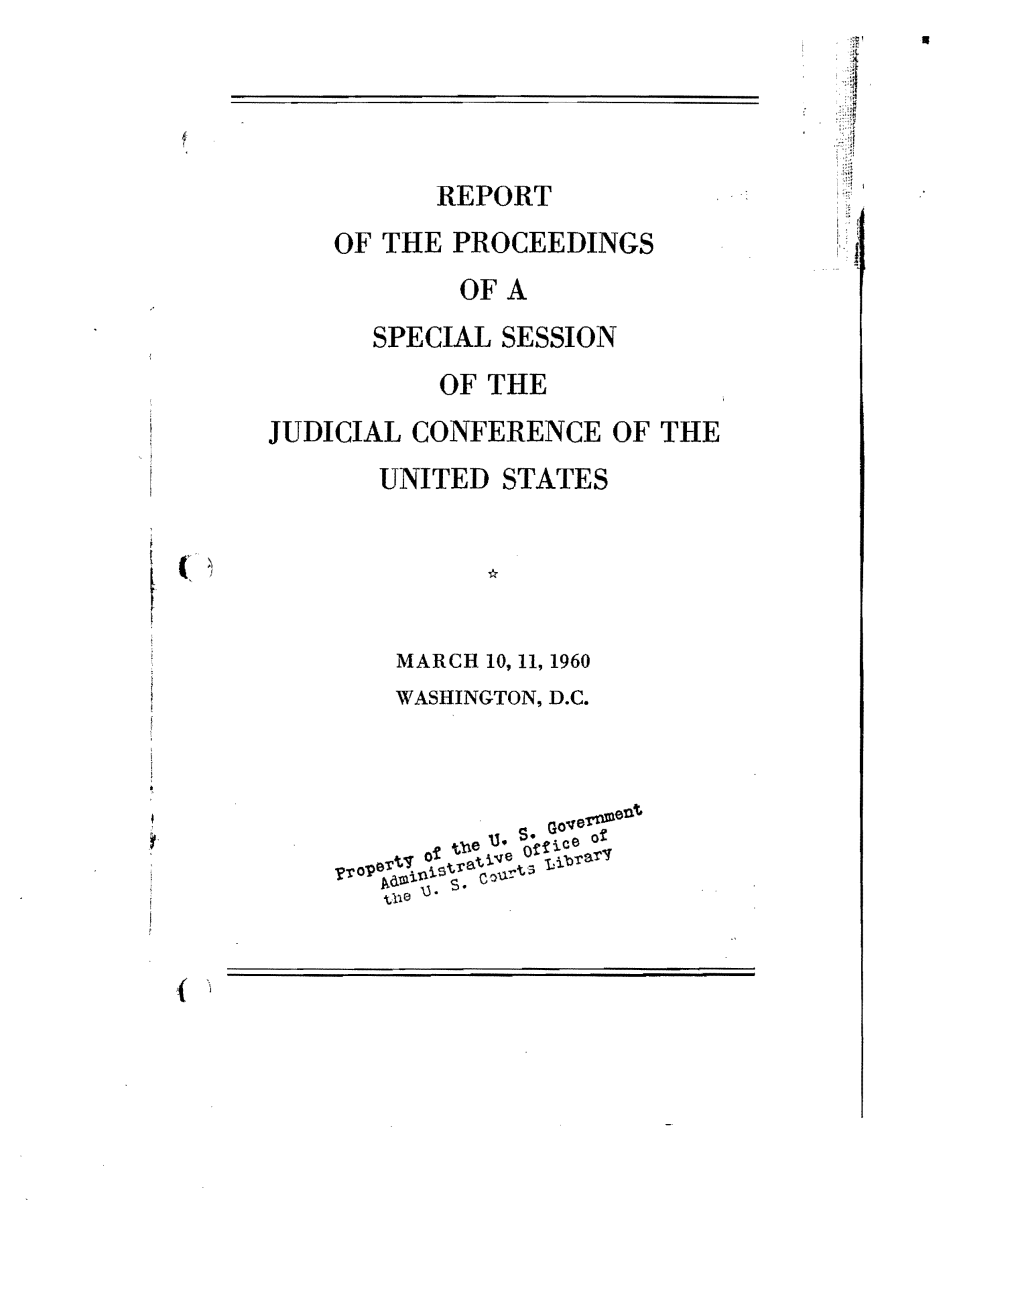 Report of the Proceedings Ofa Special Session of the Judicial Conference of the United States